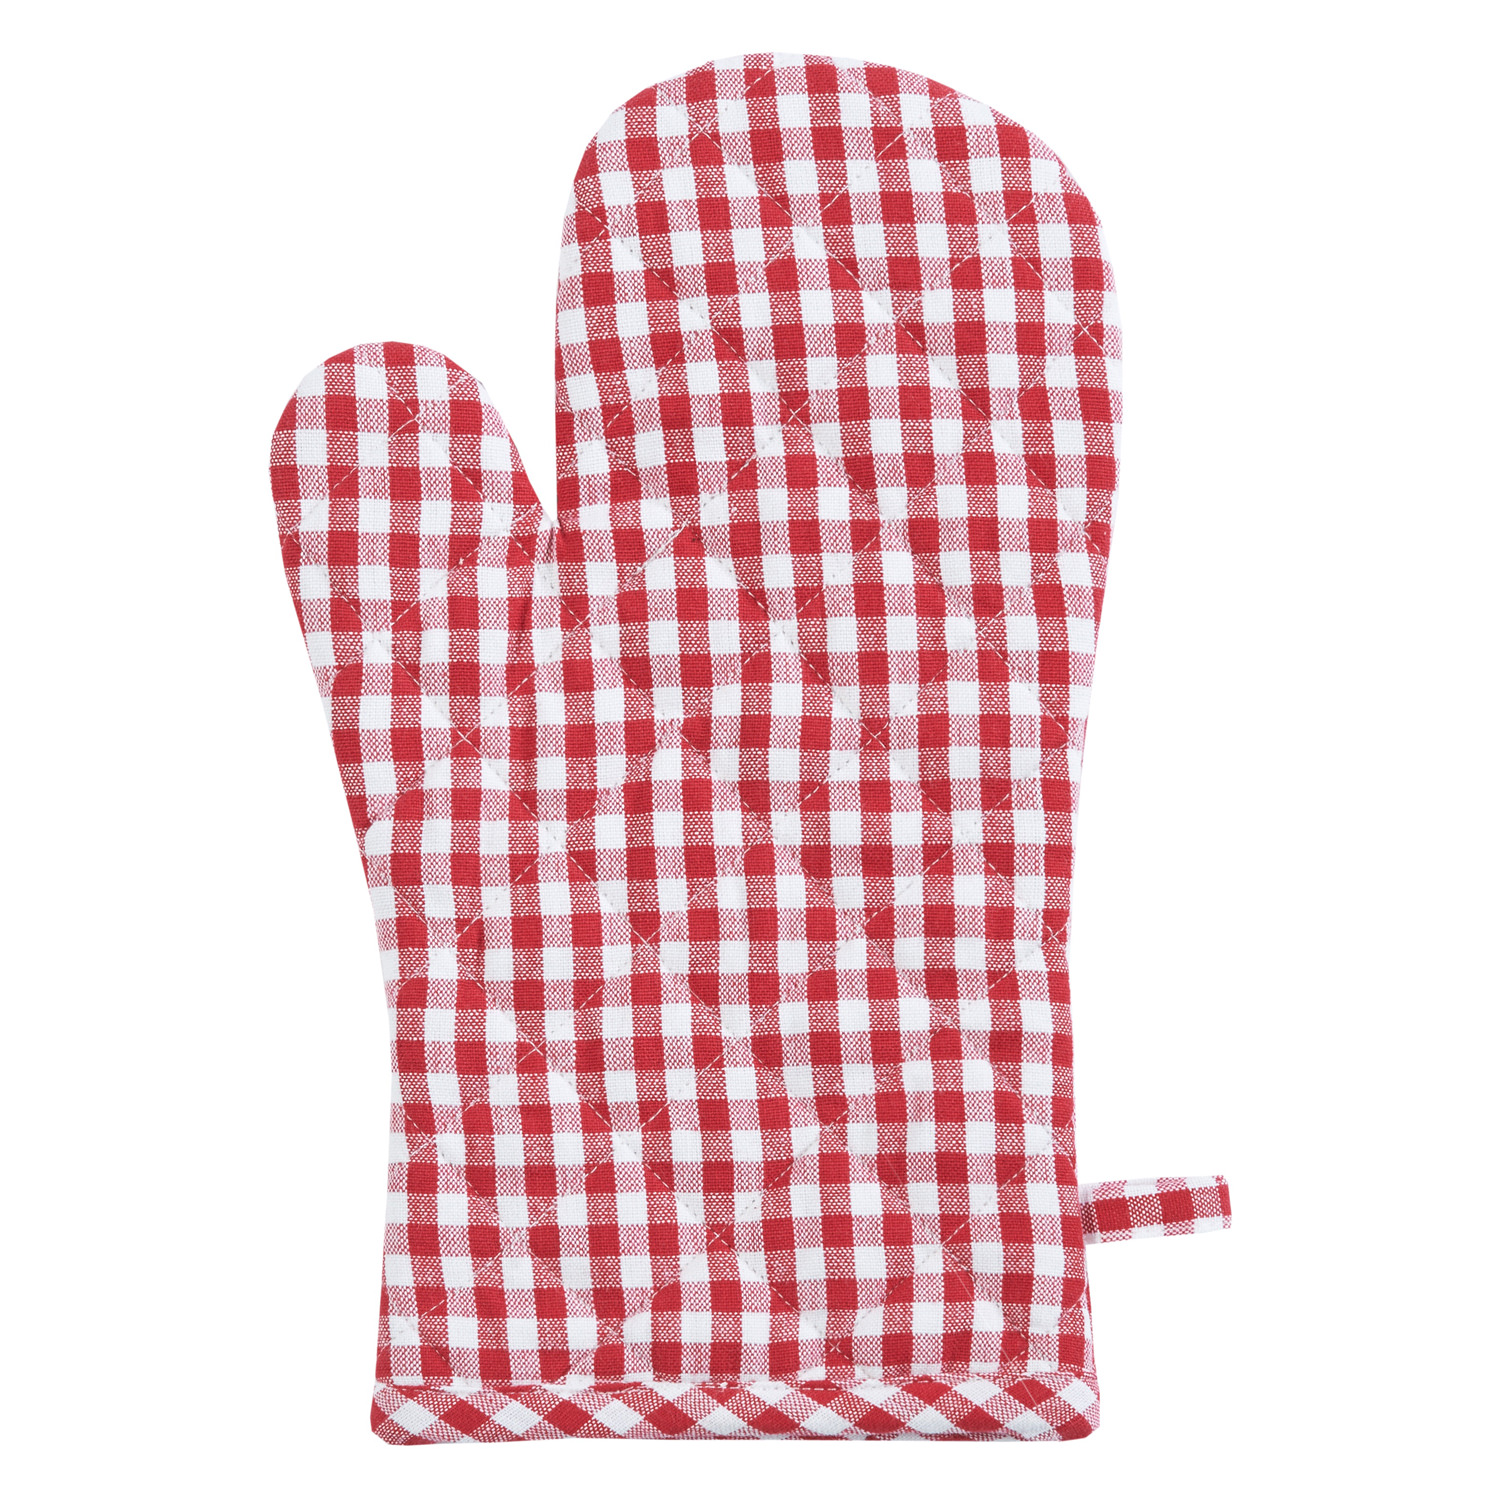 Ofenhandschuh (PSA) vichy - Farbe rot